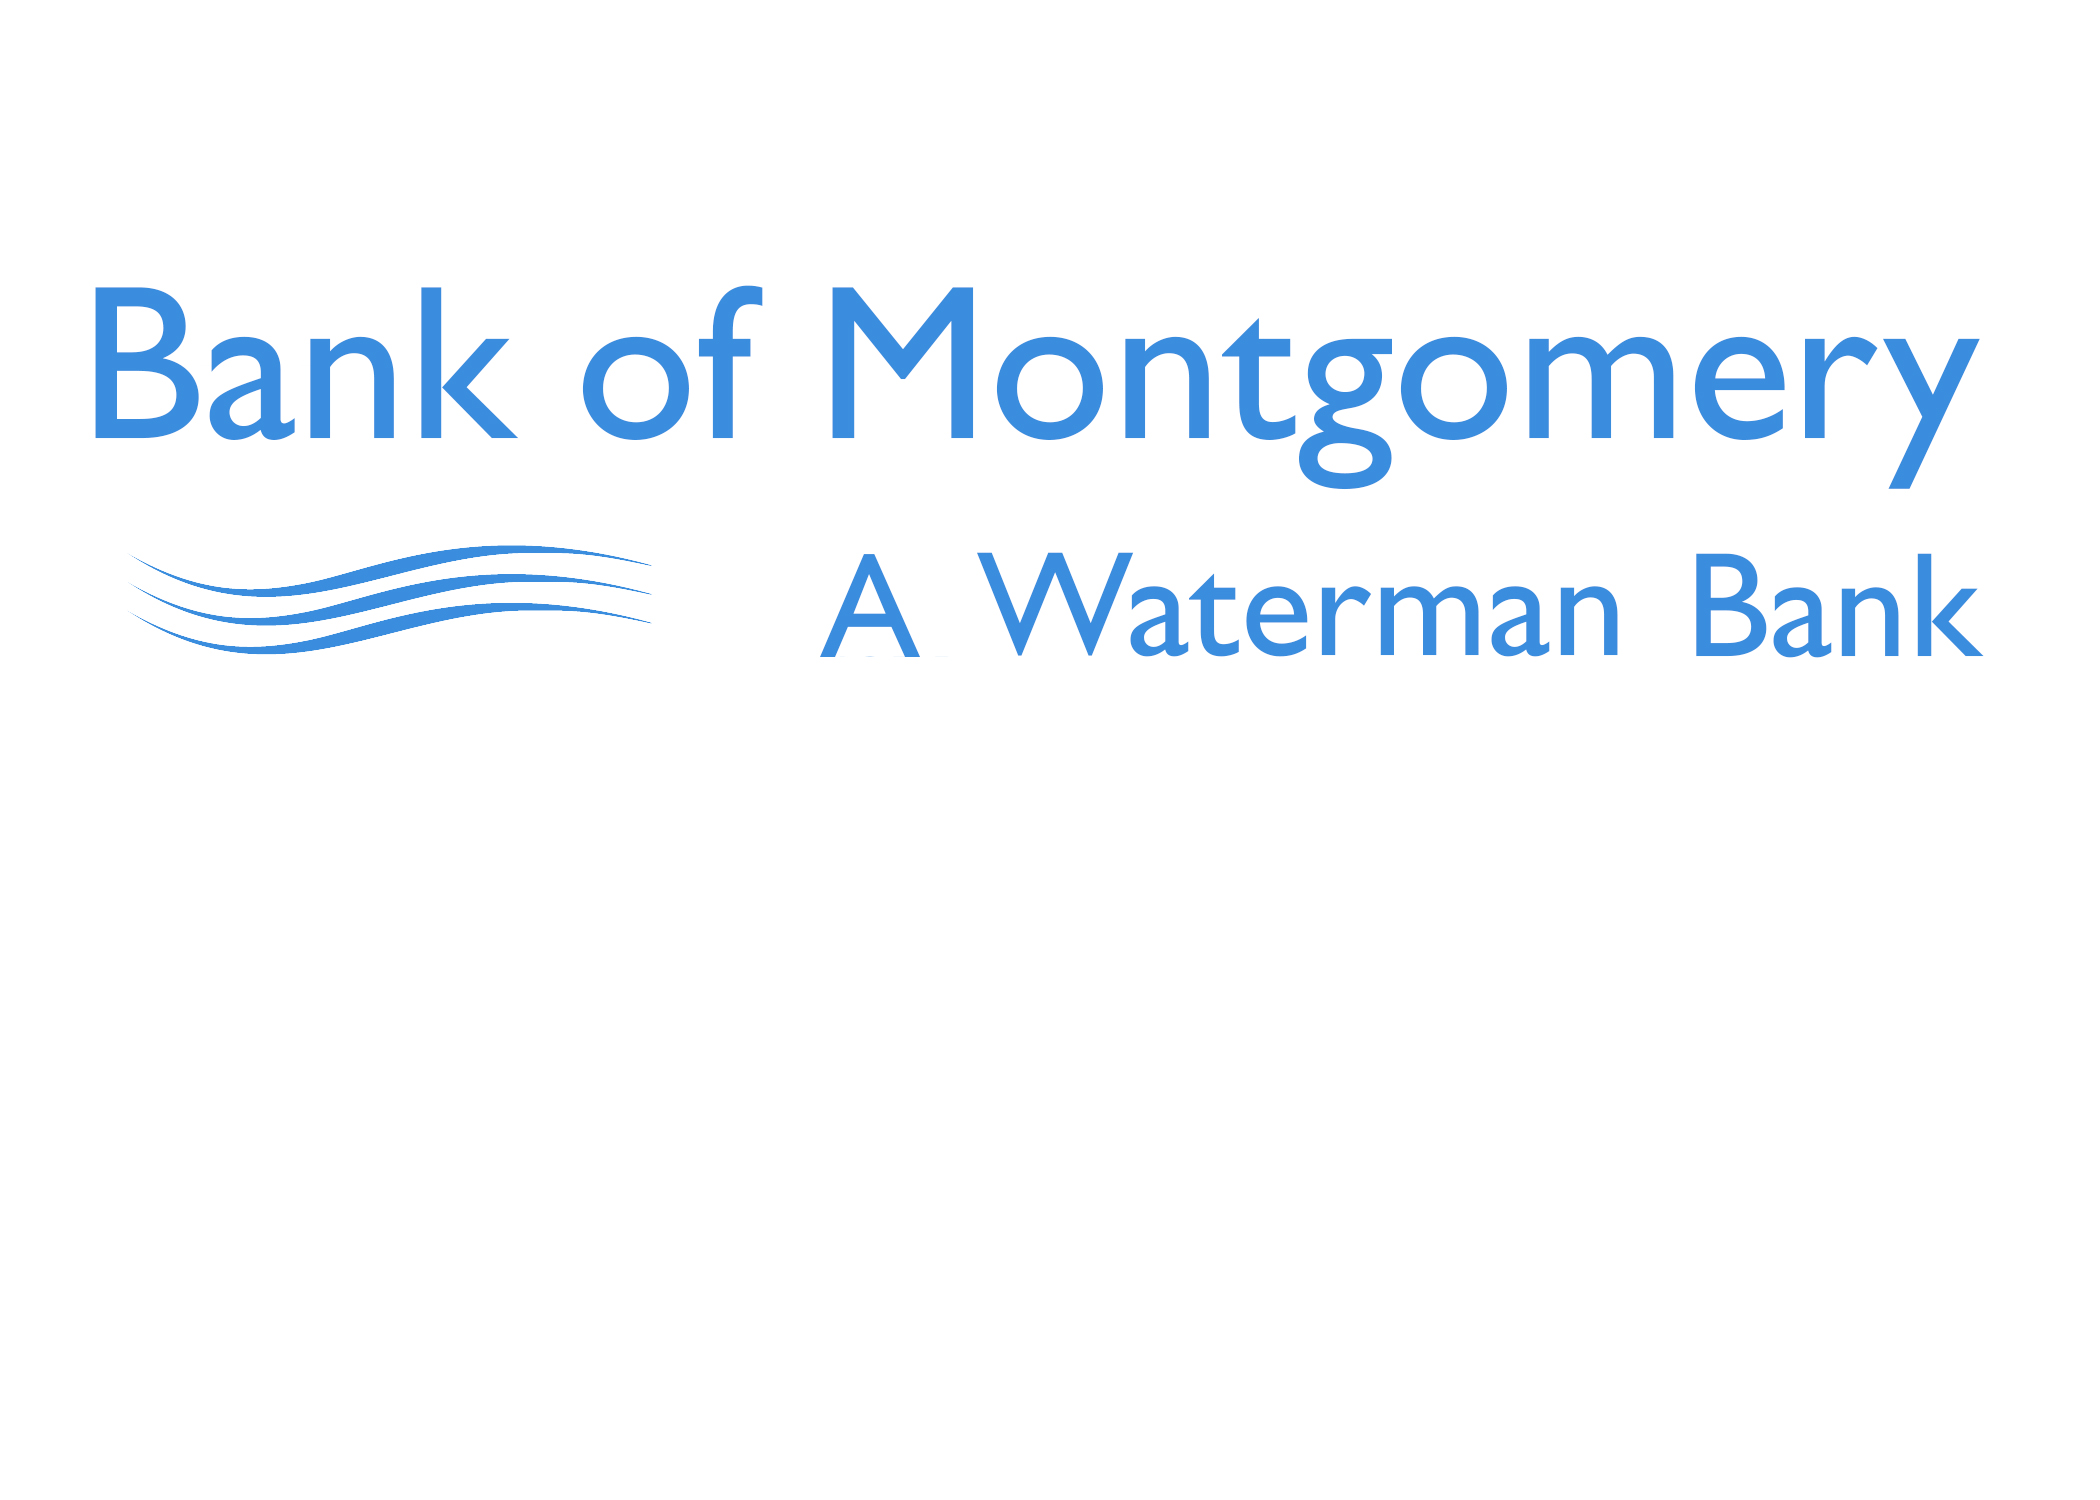 Bank of Montgomery a Waterman Bank